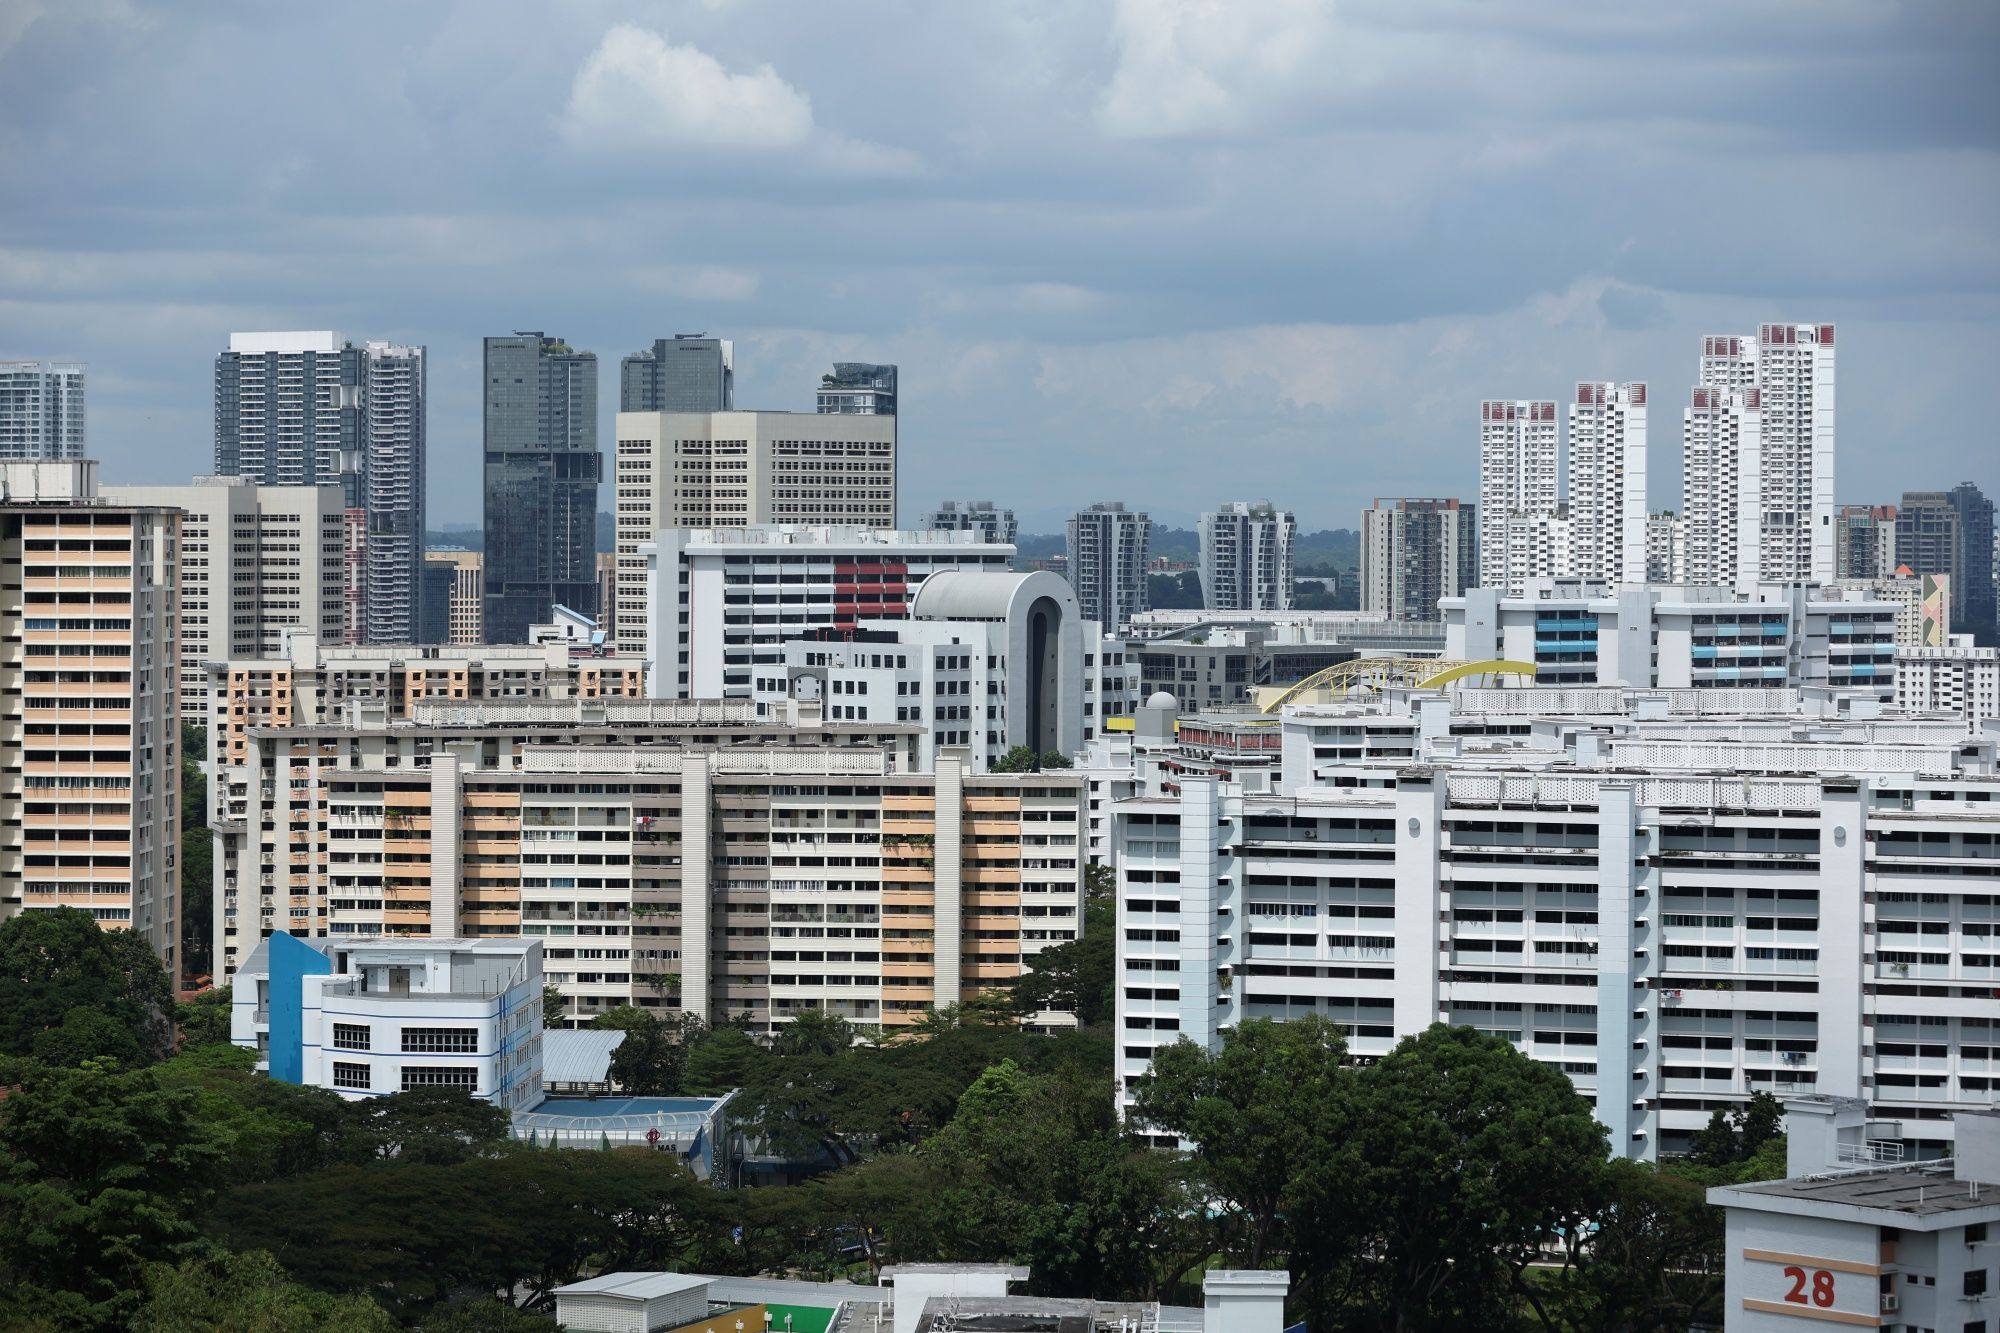 The completion of new housing projects in Singapore is likely to slow down the pace of rent increases. Photo: Bloomberg